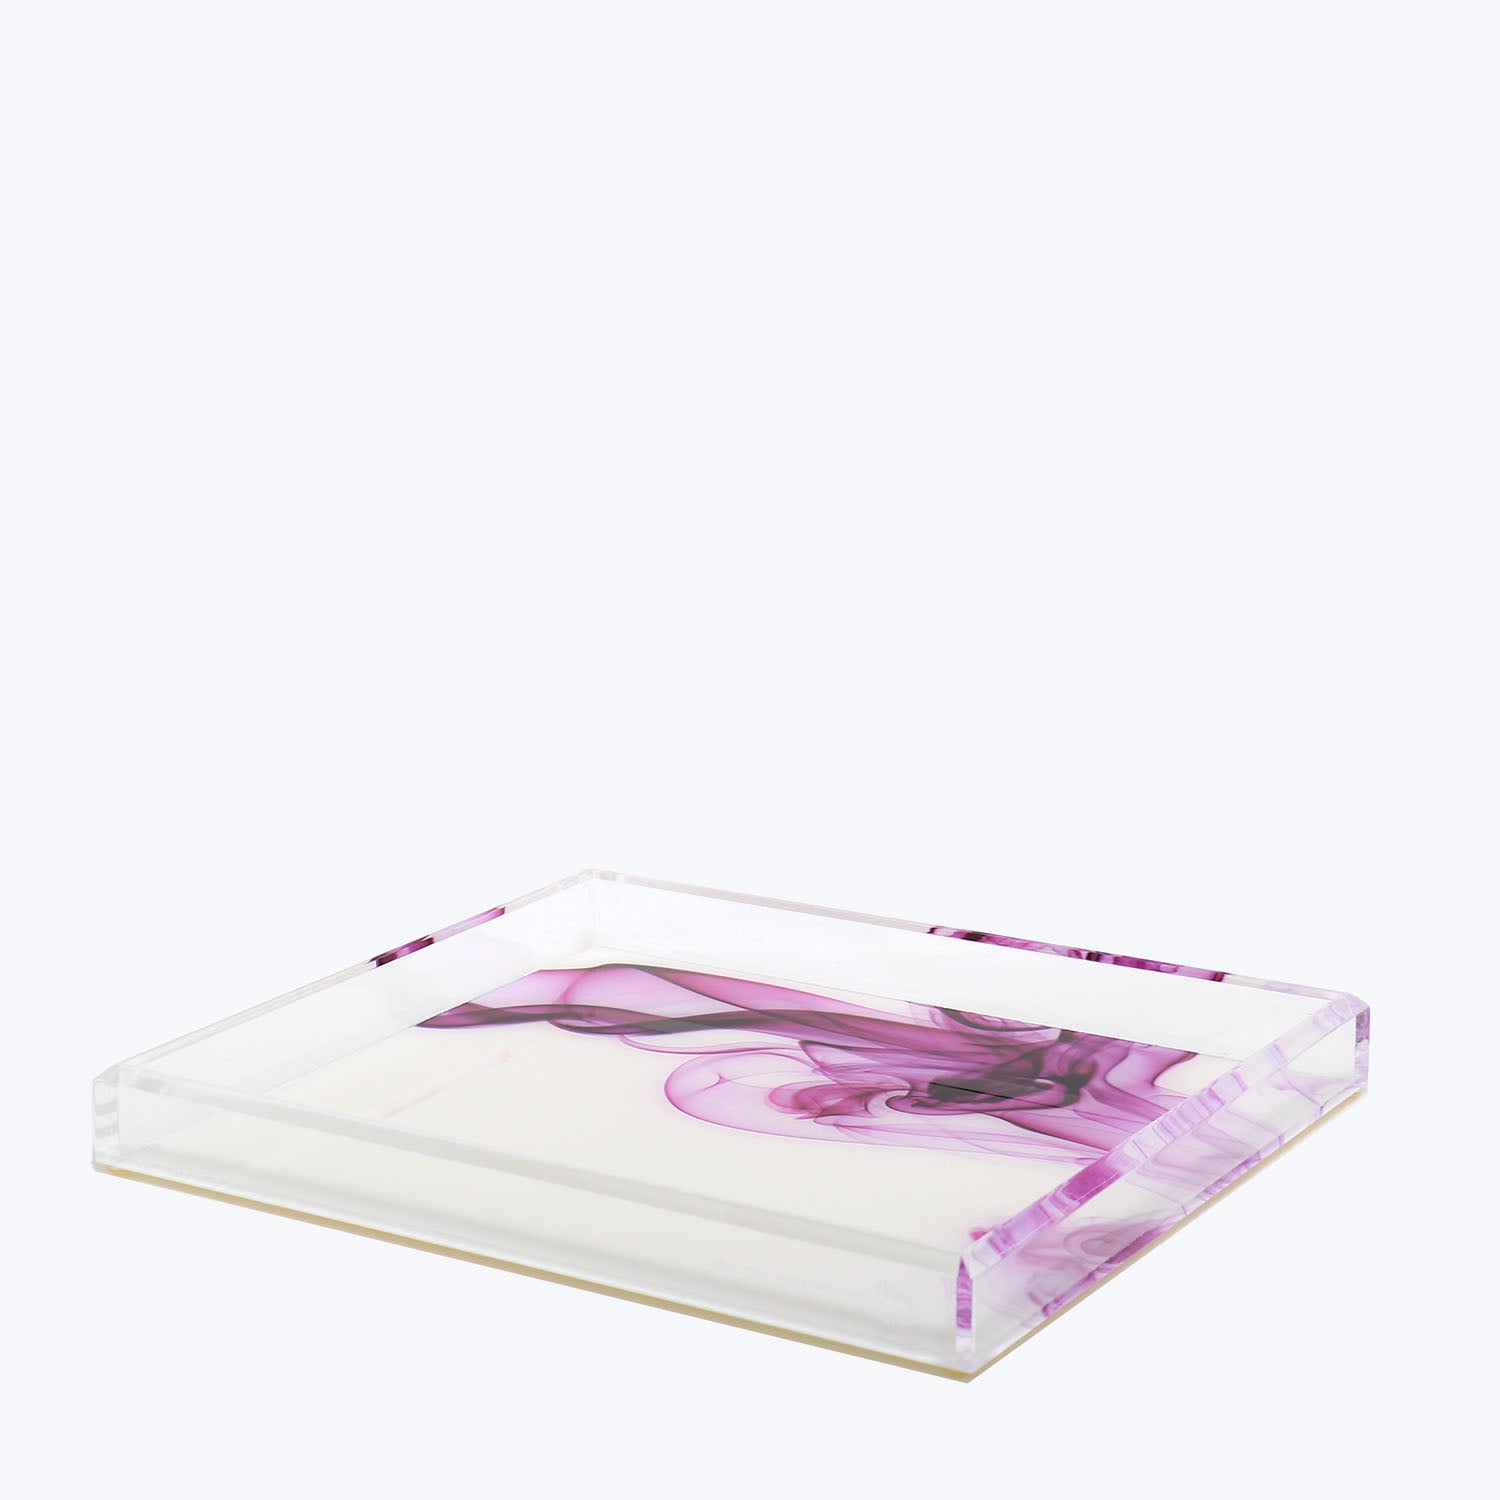 Modern, transparent tray with abstract purple swirls for stylish organization.